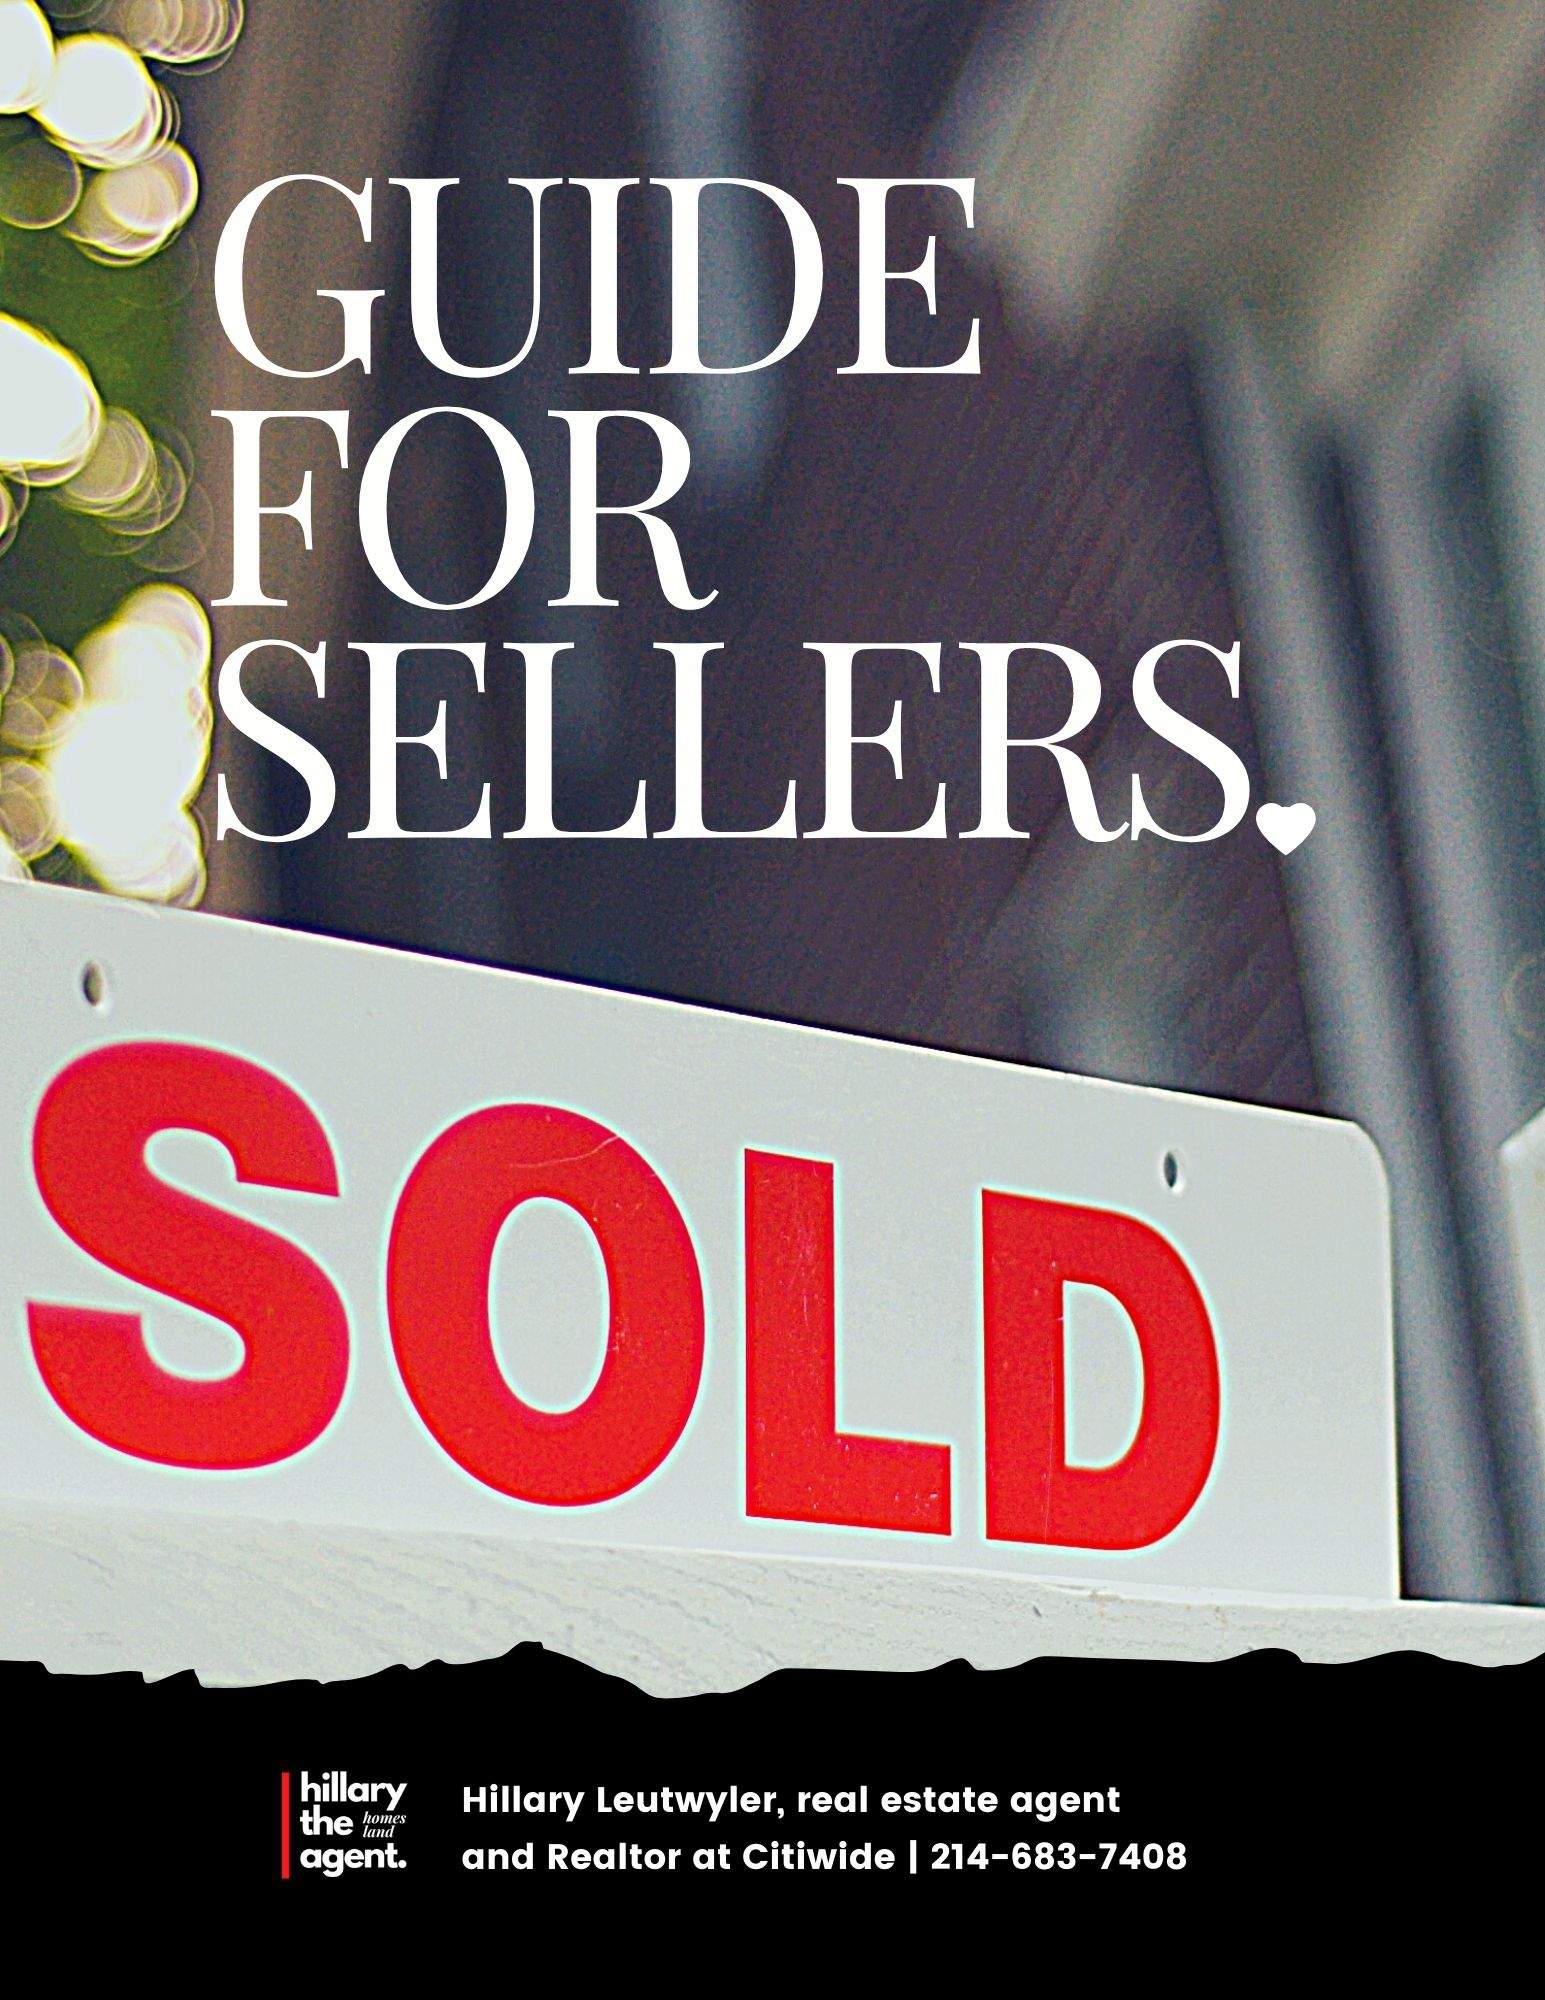 Request a special Guide For Sellers